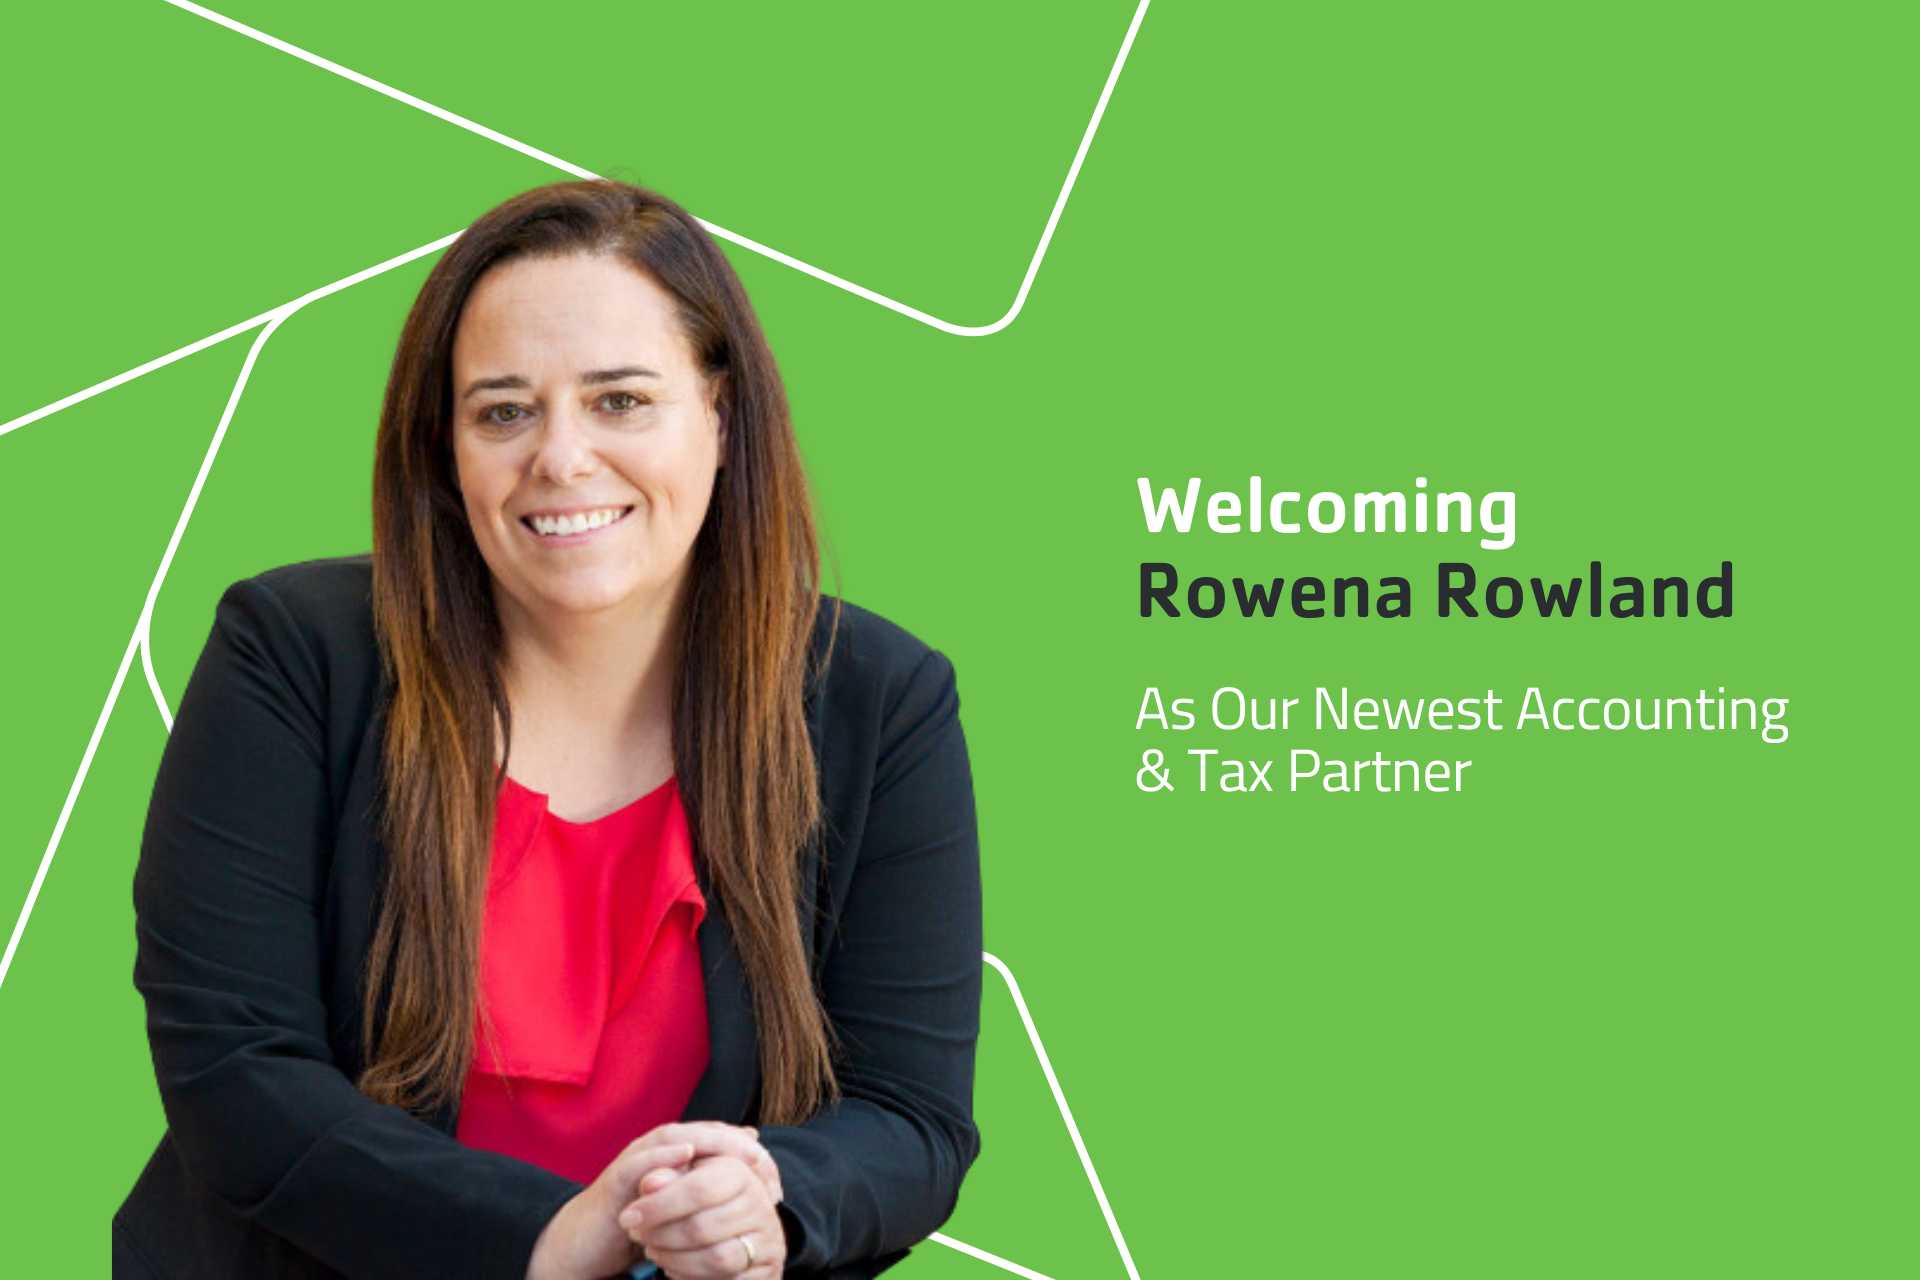 Carbon Welcomes Rowena Rowland as New Accounting & Tax Partner